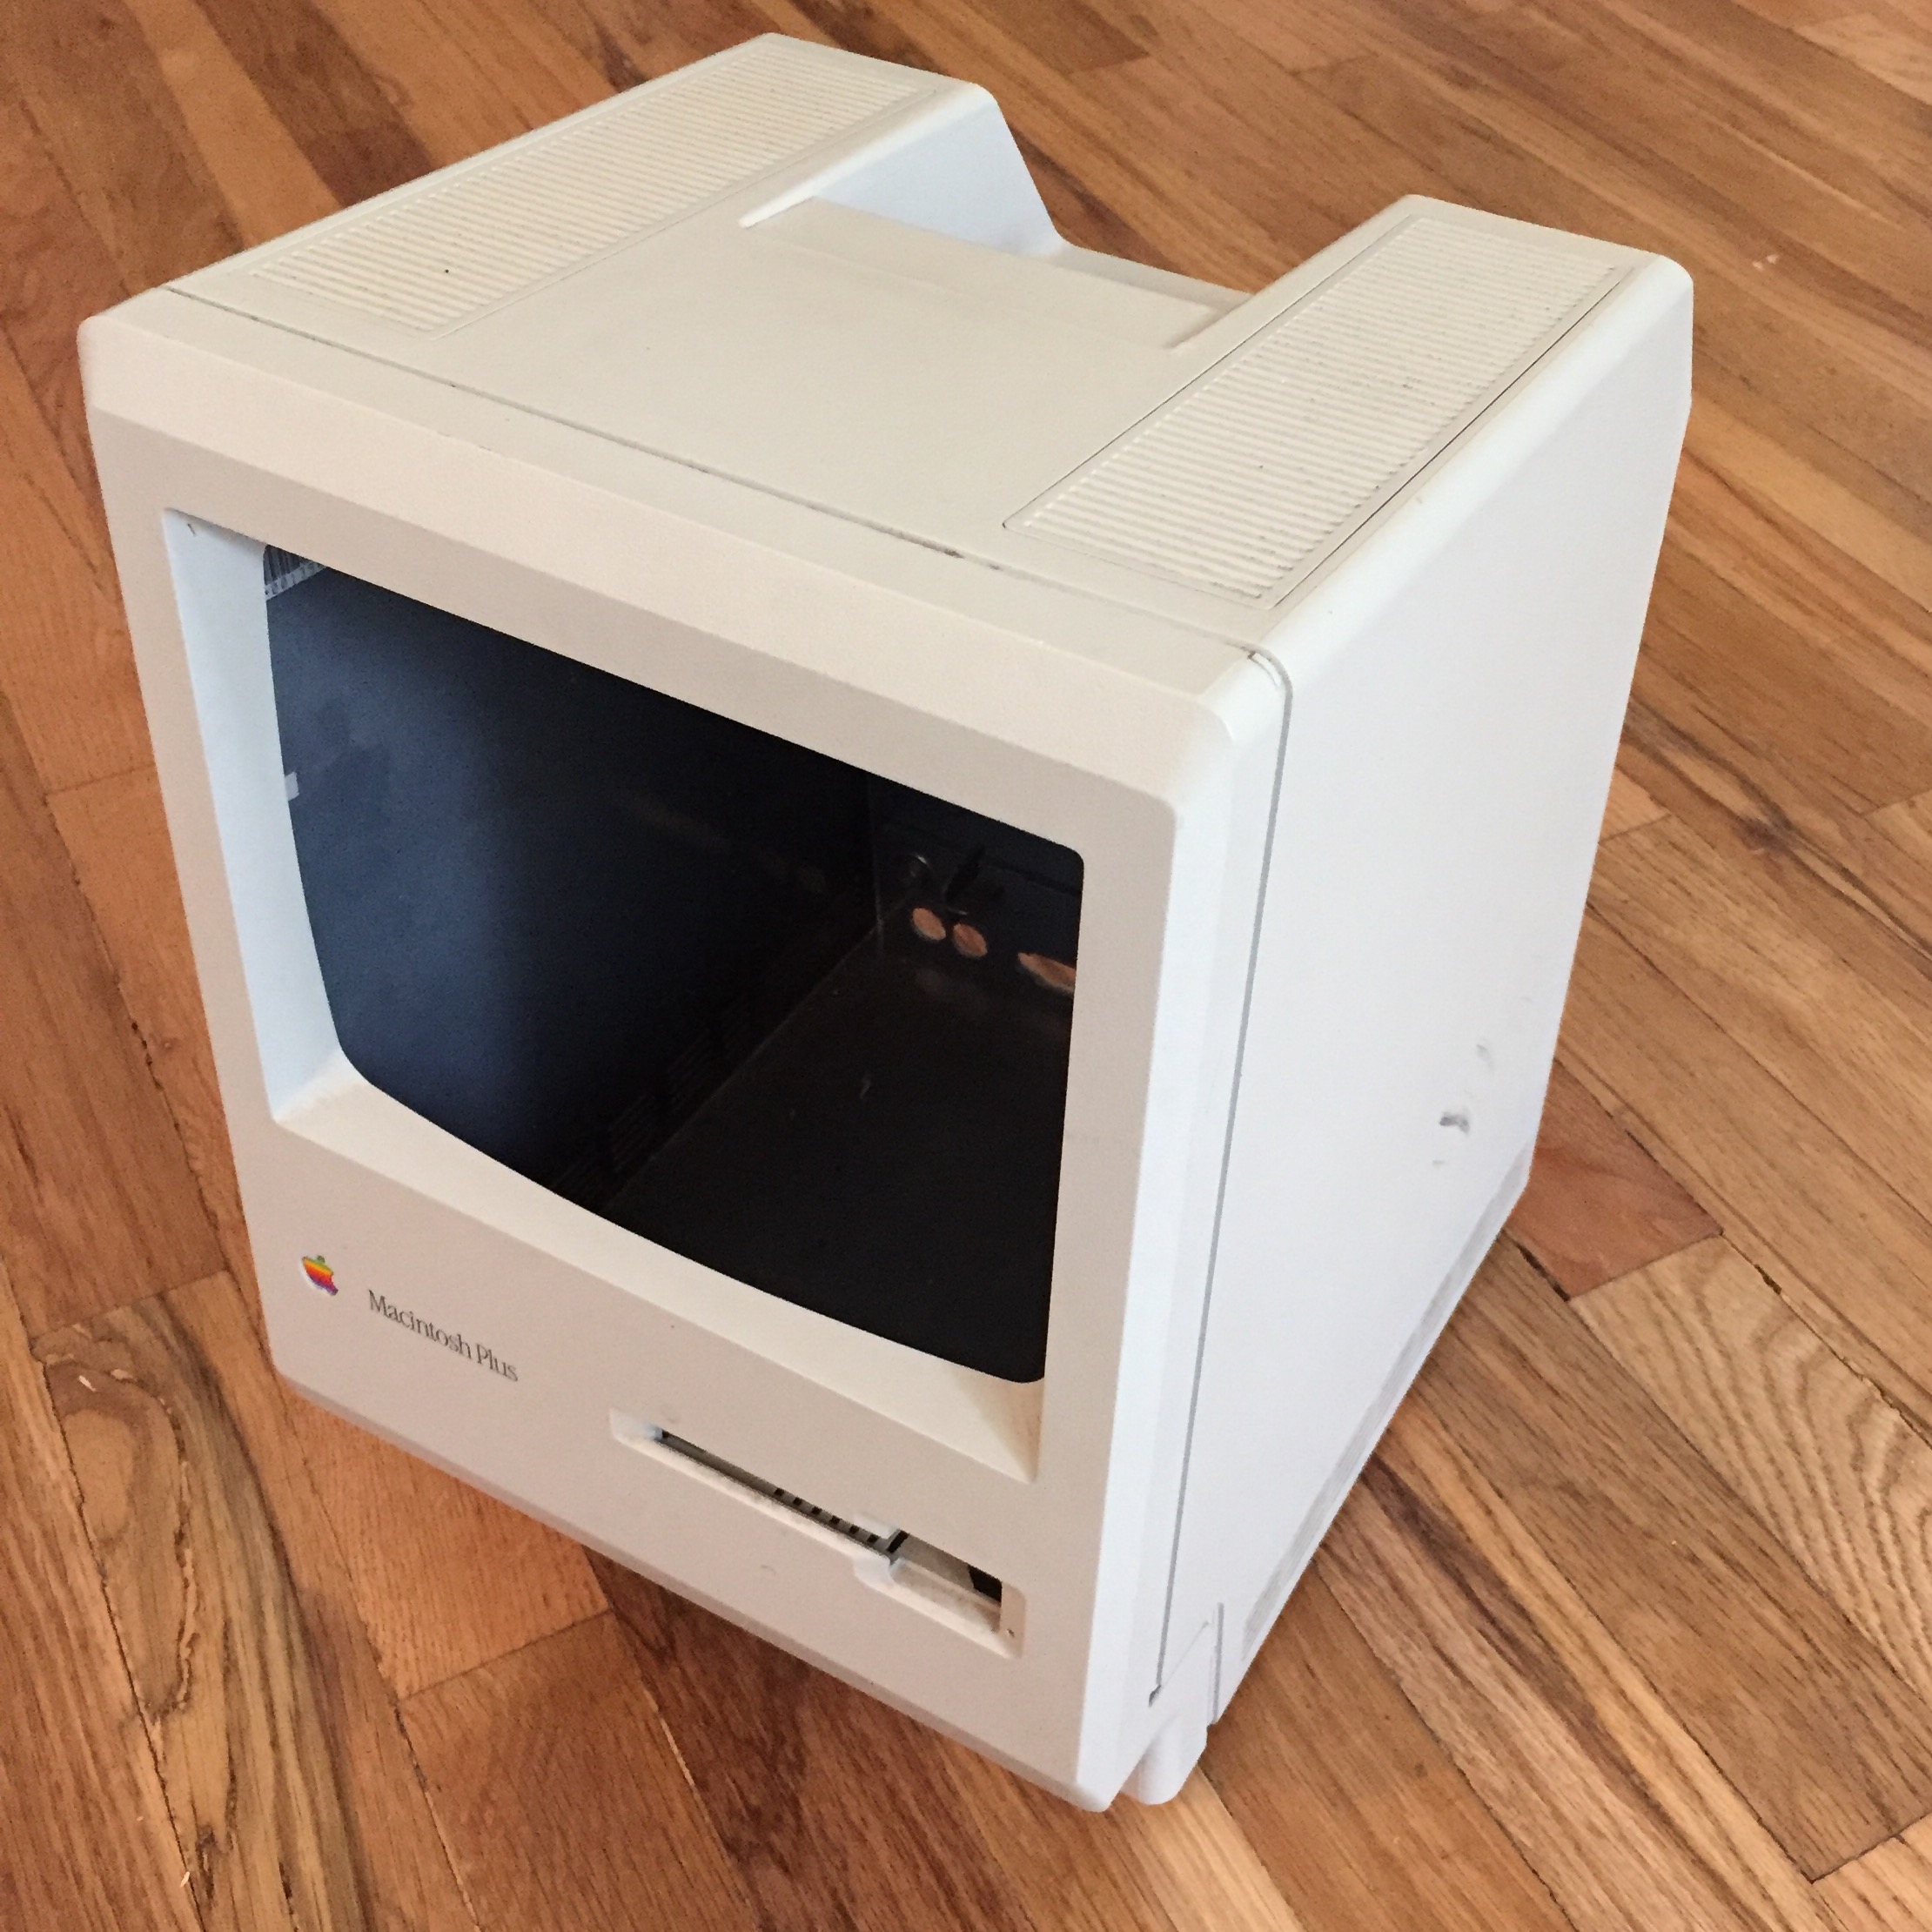 Man Turned a Classic Mac into something totally unbelievable